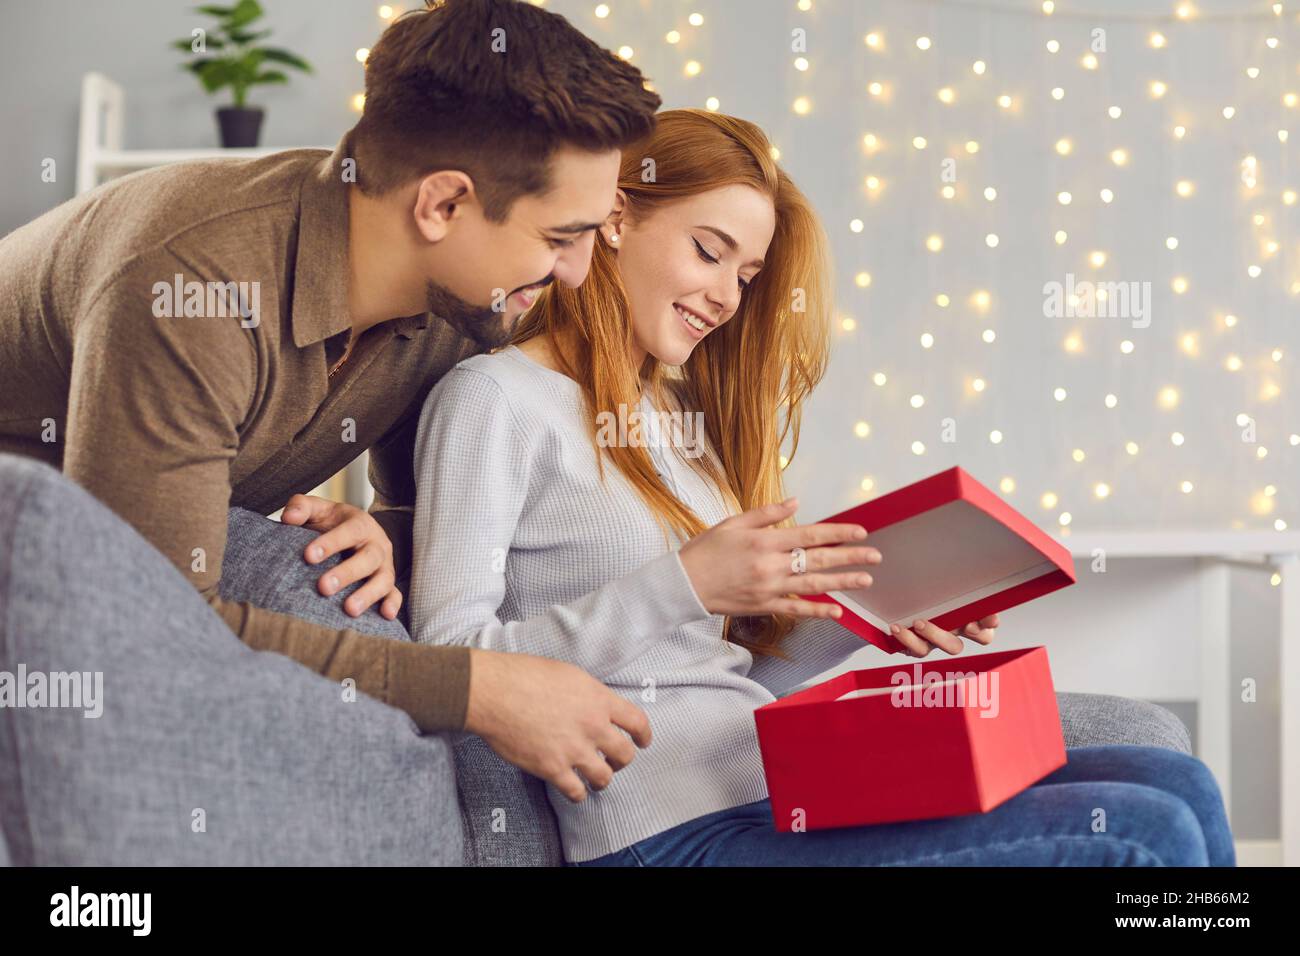 Happy young woman sitting on couch and opening Valentine present from her boyfriend Stock Photo